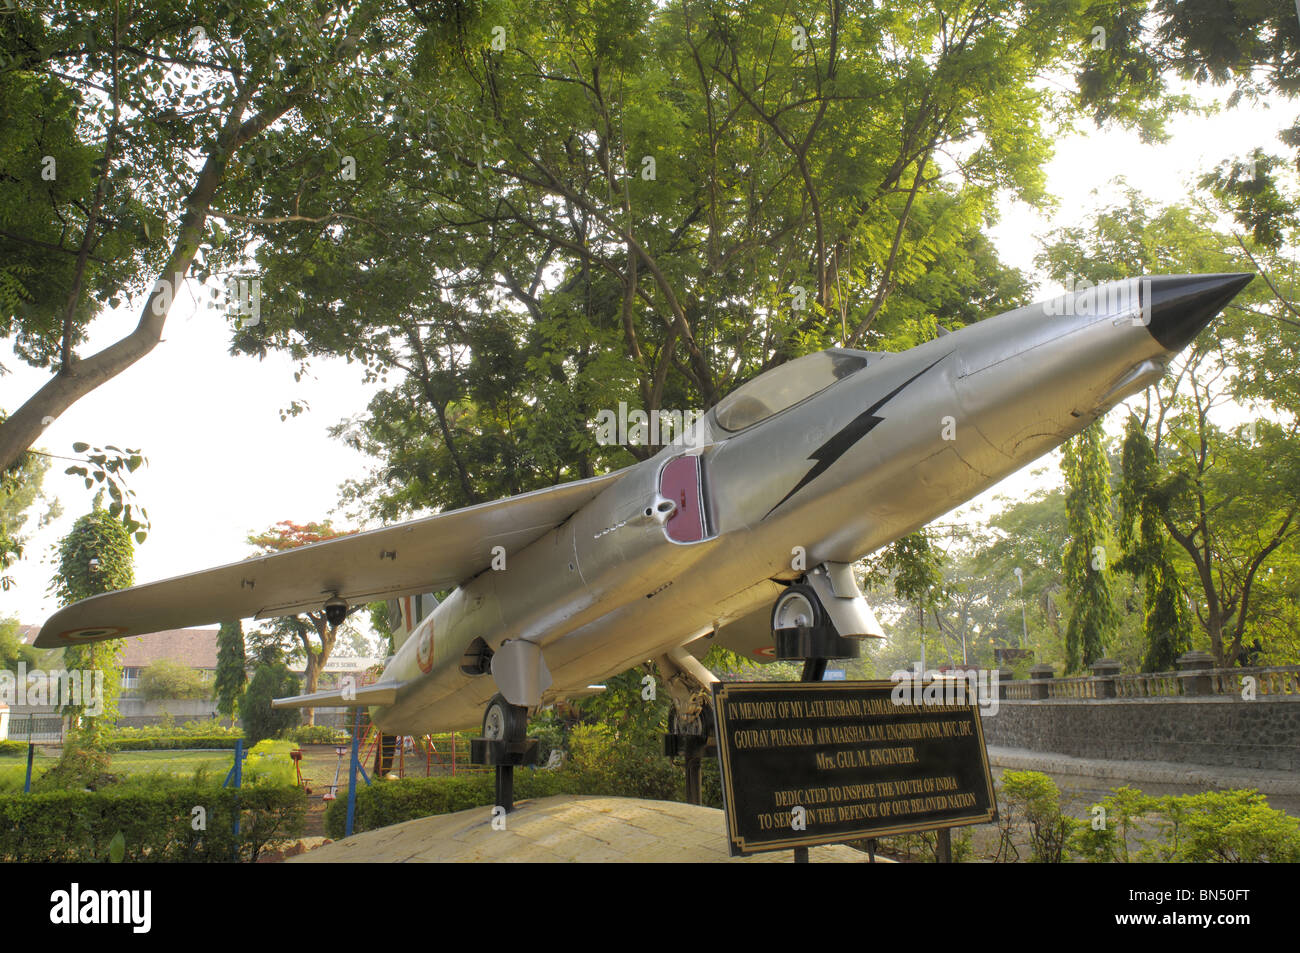 Gnat – Fighter aircraft, donated by Mrs Gul Engineer in garden outside ST. Mary’s Church, Pune, Maharashtra, INDIA. Stock Photo